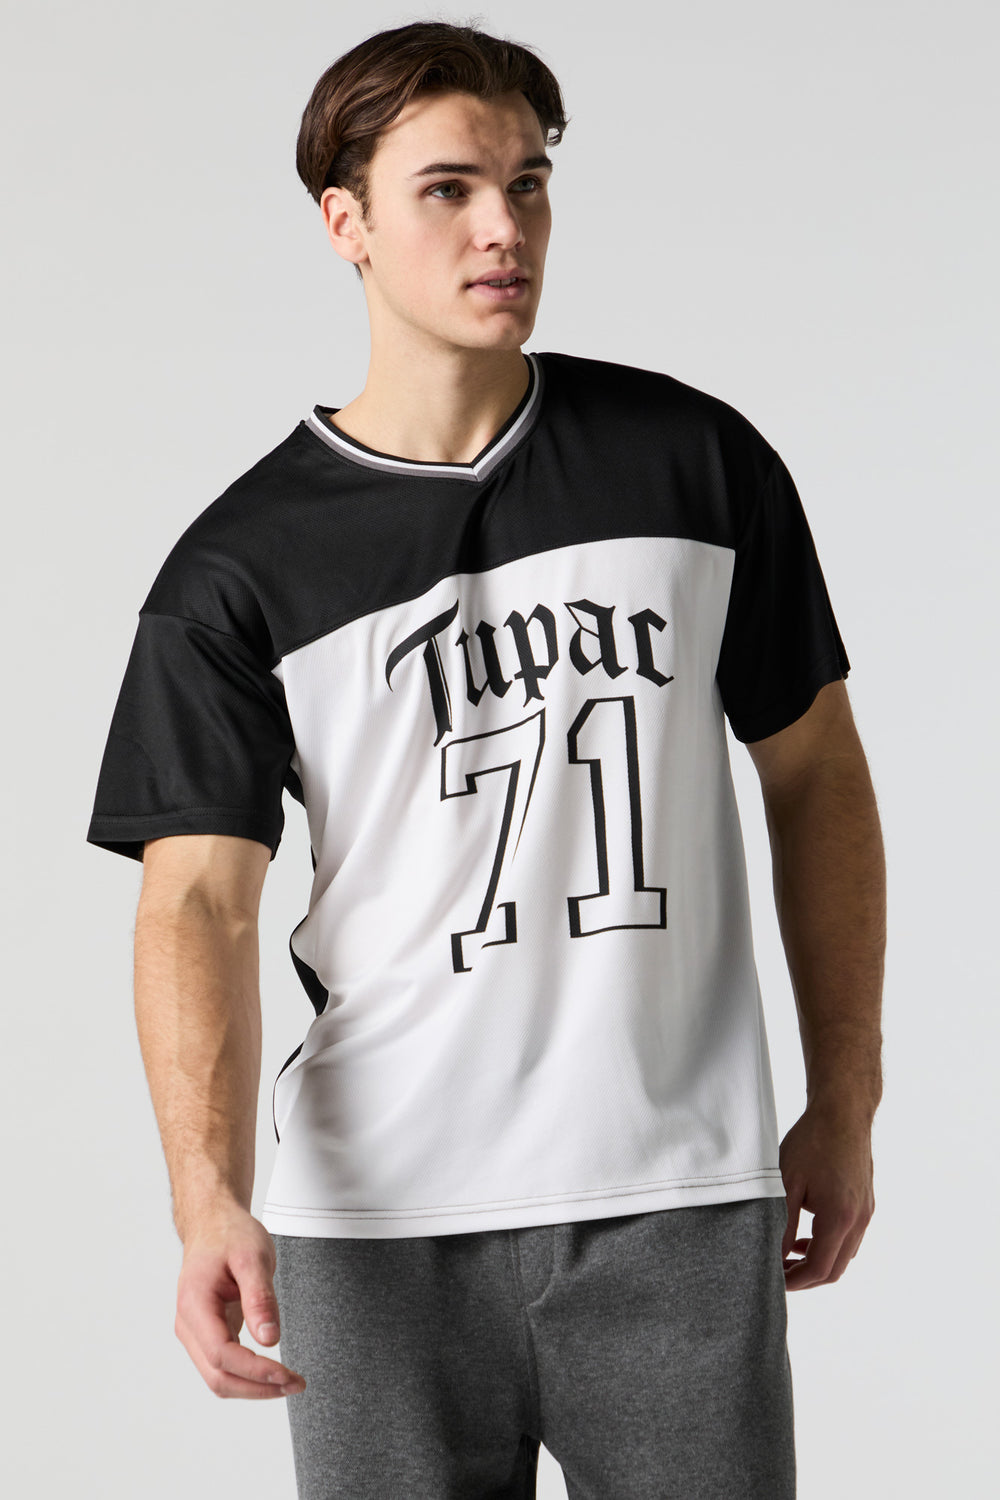 Tupac Graphic Football Jersey Tupac Graphic Football Jersey 2